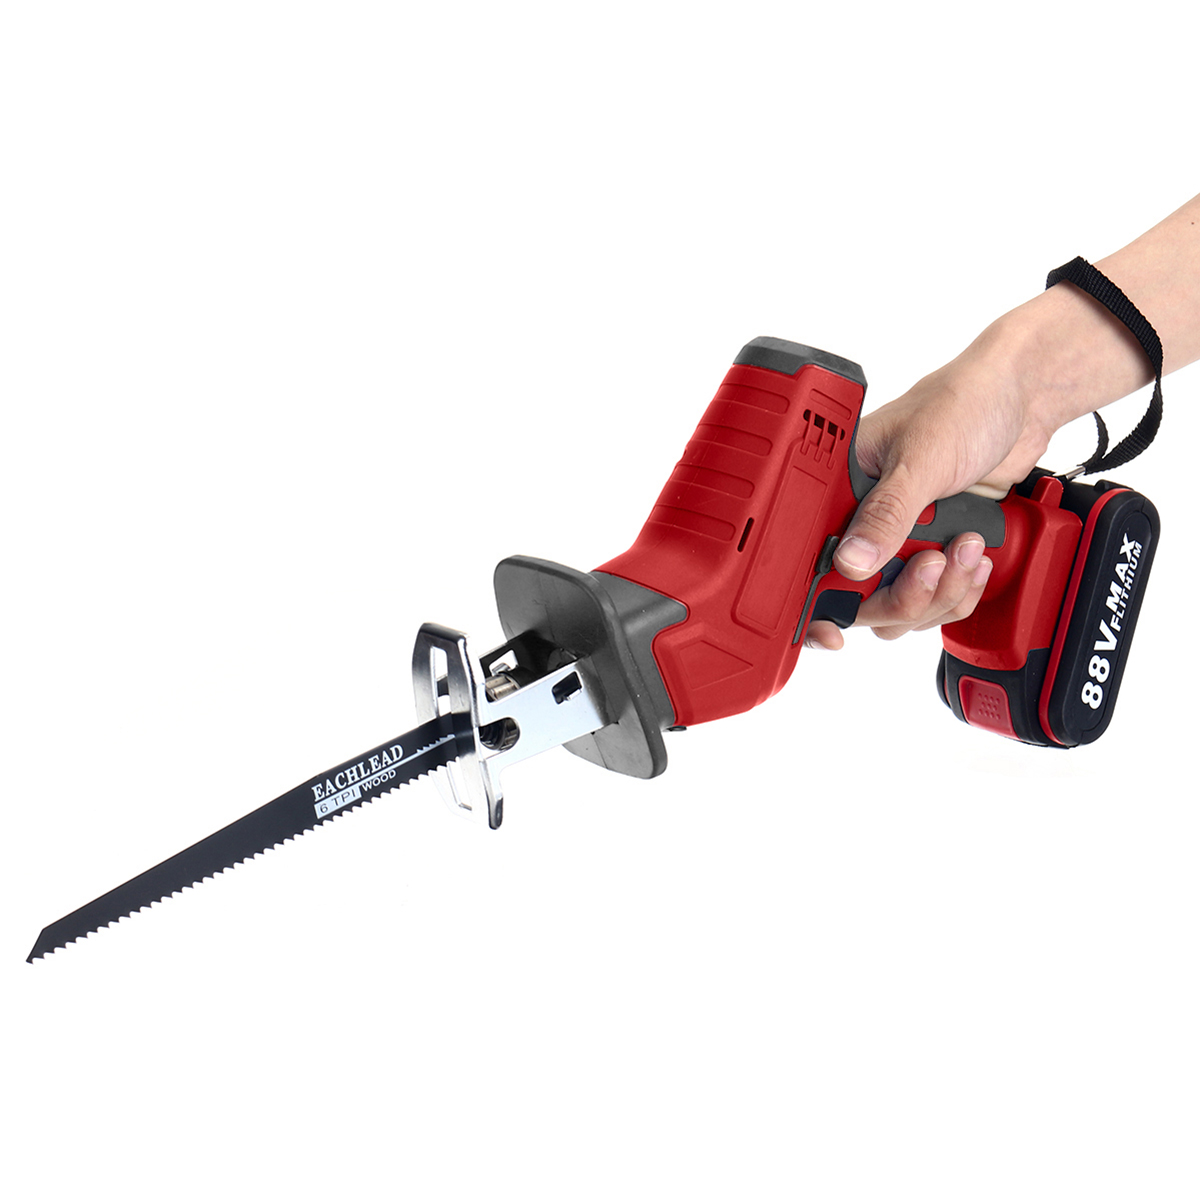 88VF-3000RPM-Rechargeable-Electric-Saw-Branches-Metal-Wood-Sawing-Cutting-Tool-1765732-1